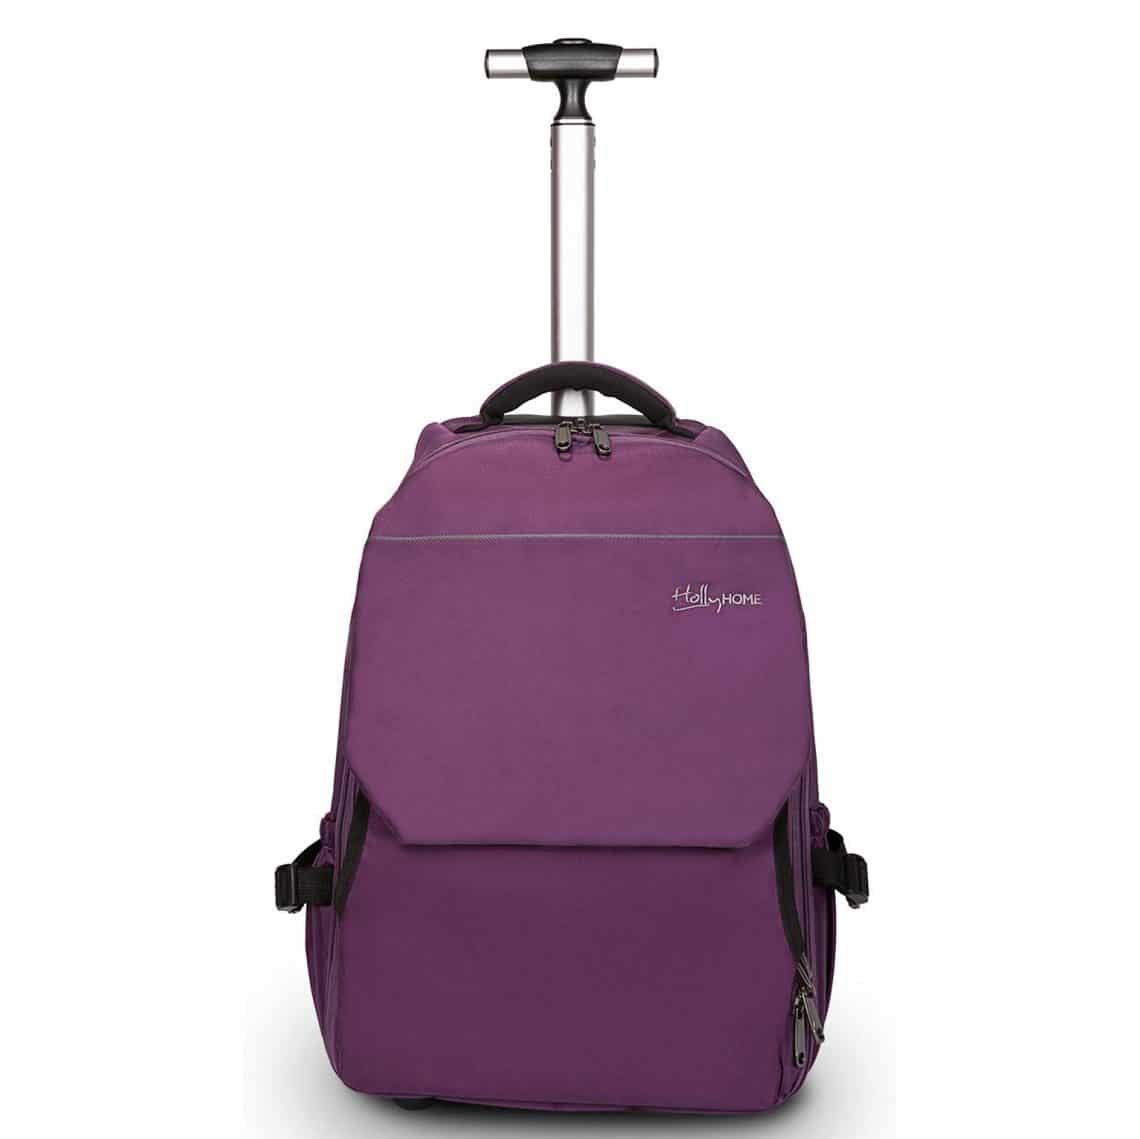 small rolling backpacks for travel